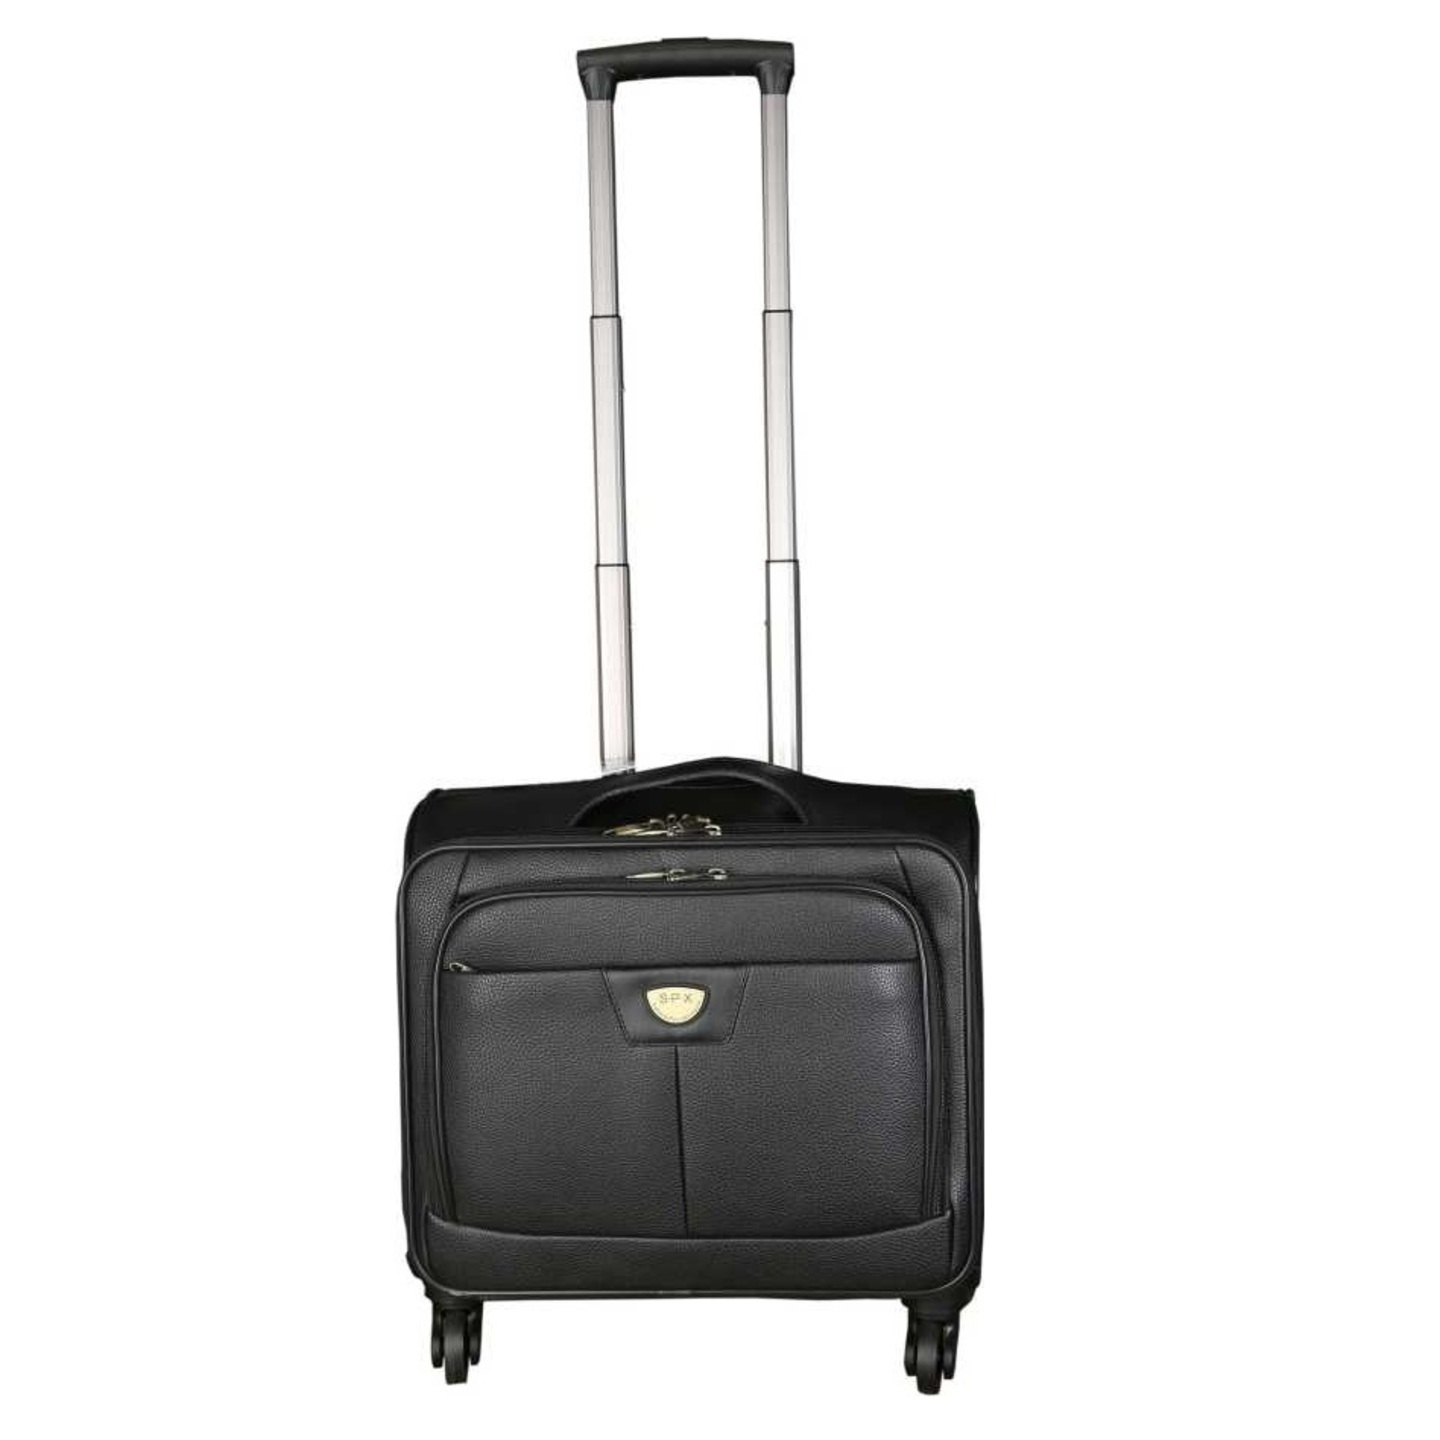 Sahara Exclusive 15.6 inch PU leather Laptop Trolley Bag